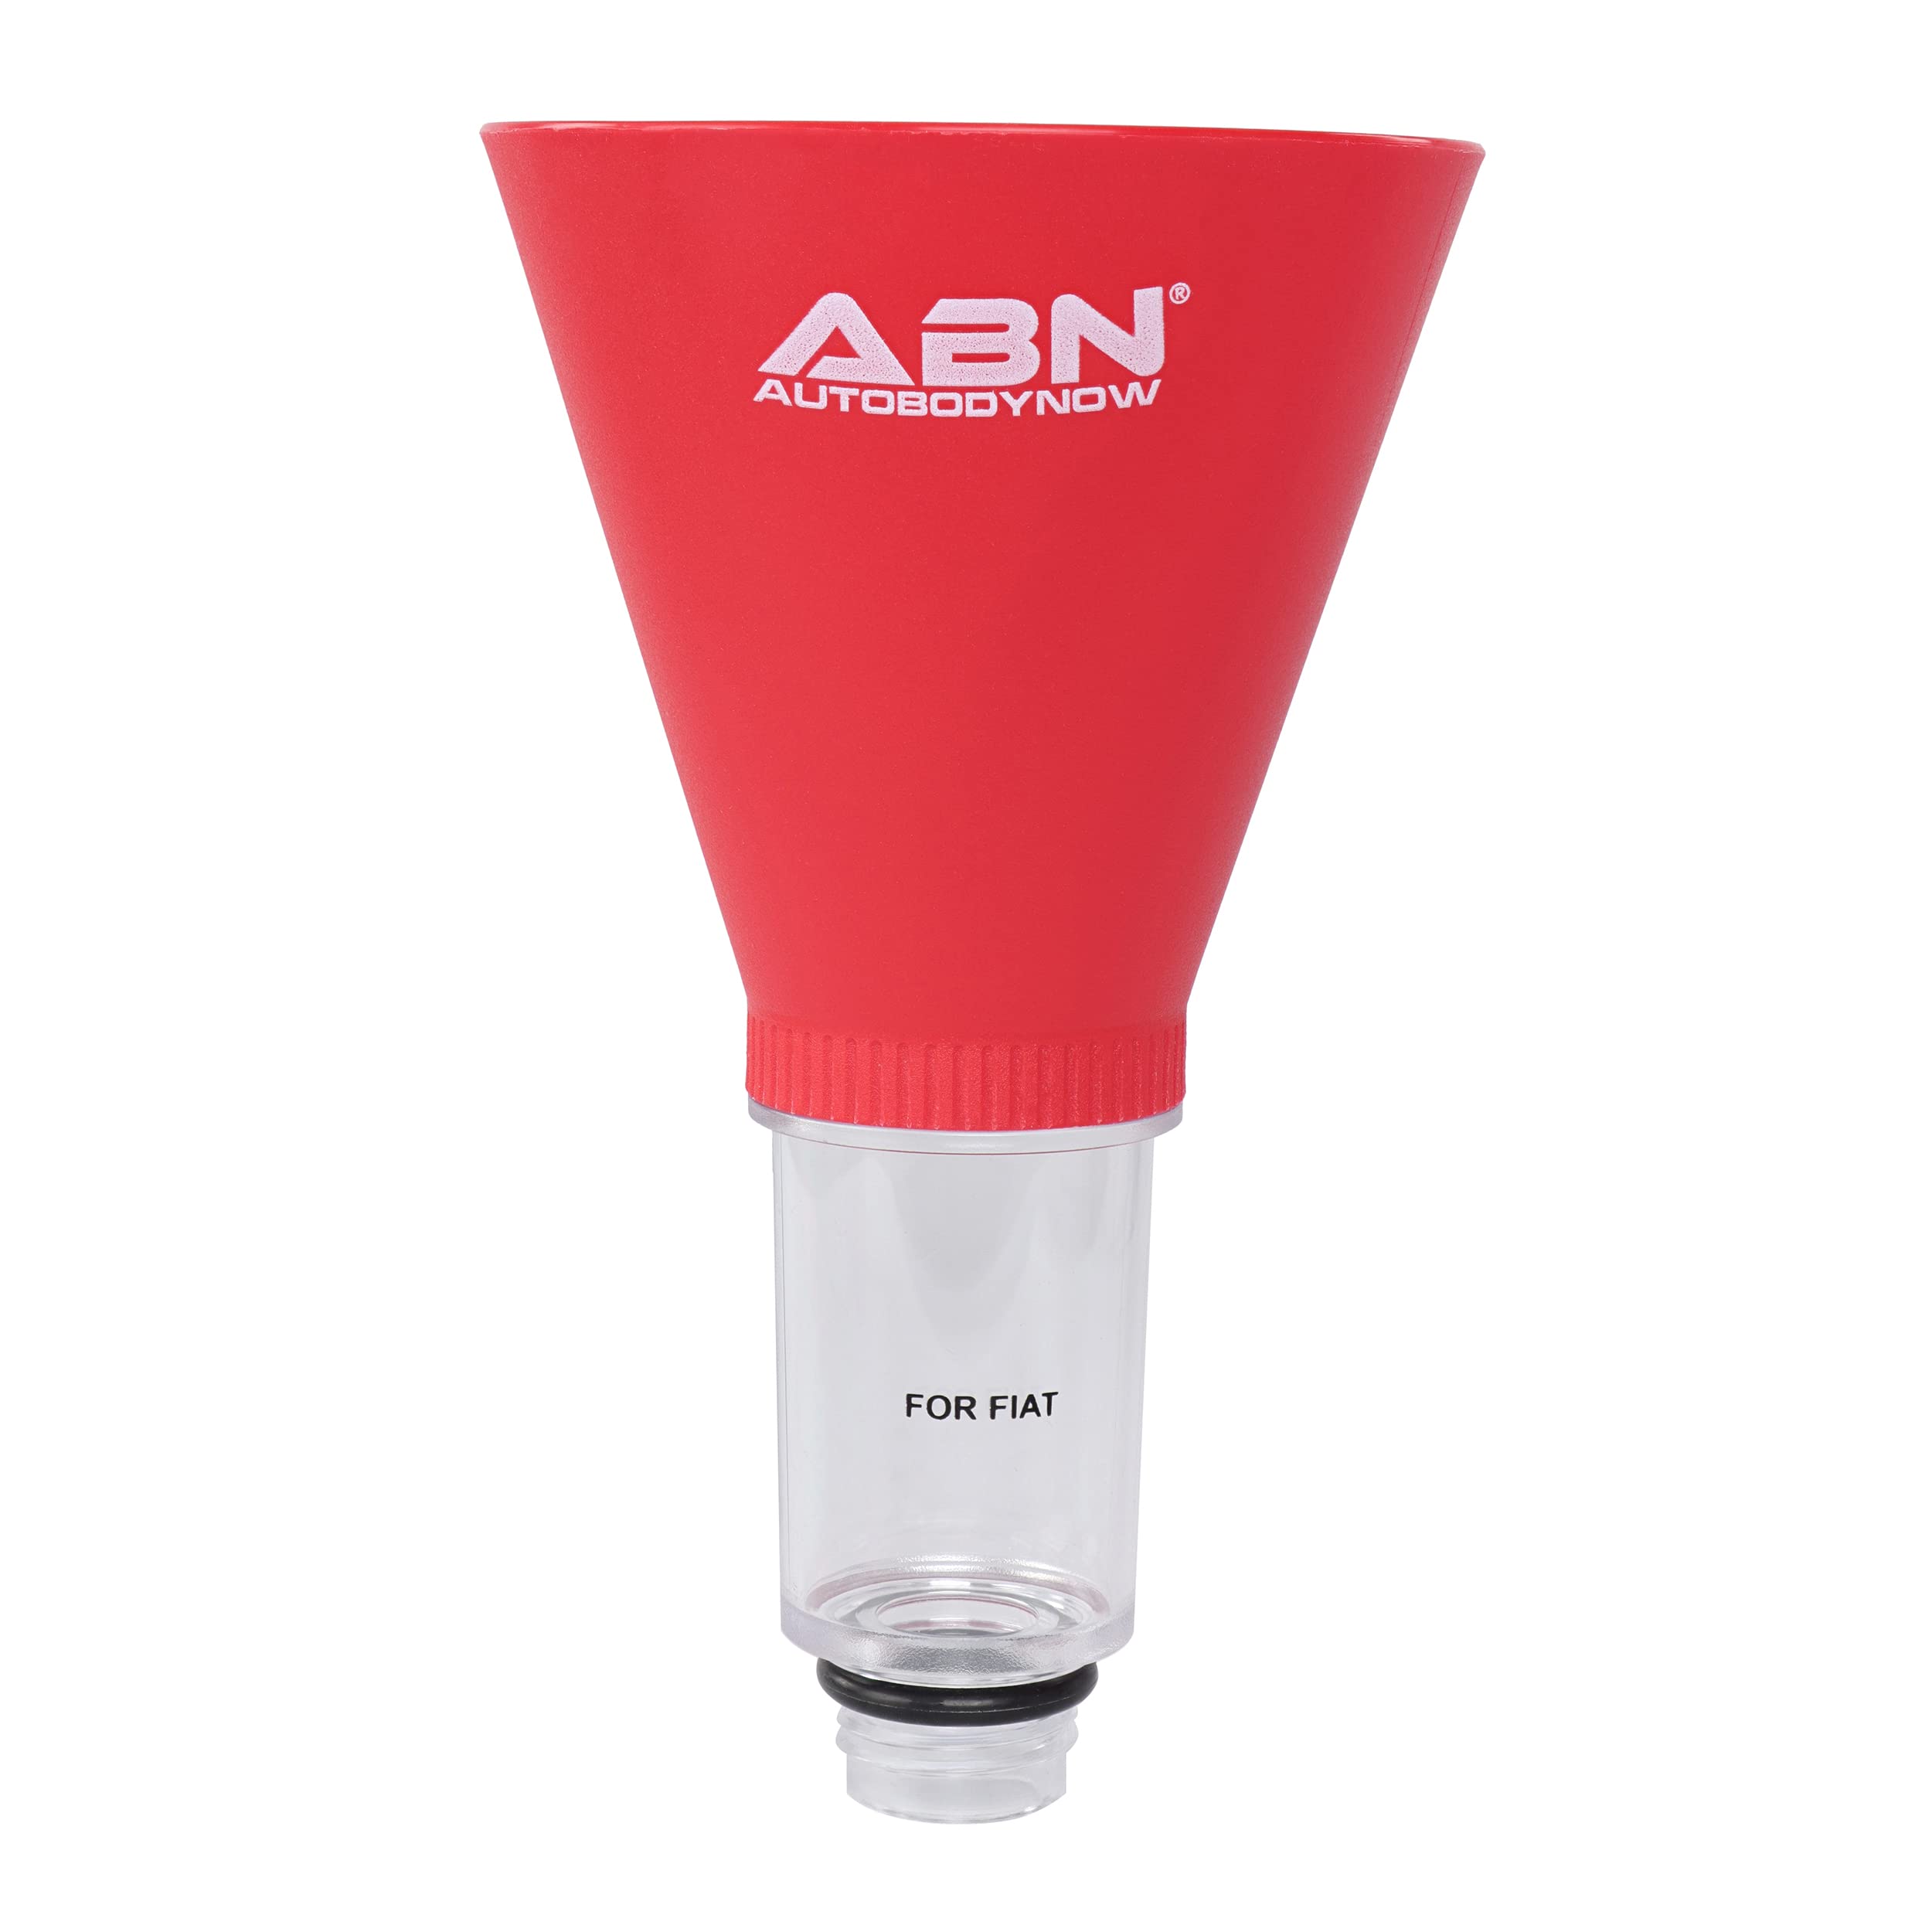 ABN Automotive Funnel - Engine Oil Funnel for Use as Oil change Funnel with No Spilling